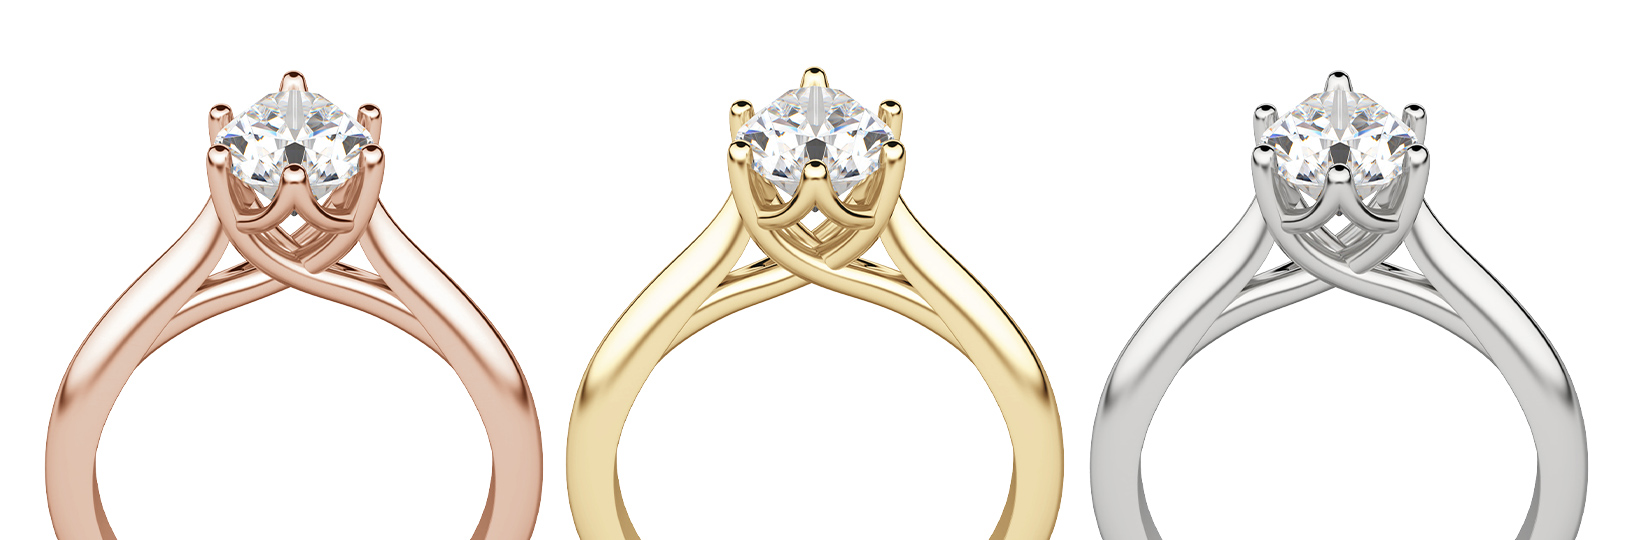 Rose gold, yellow gold and white gold all make for beautiful rings